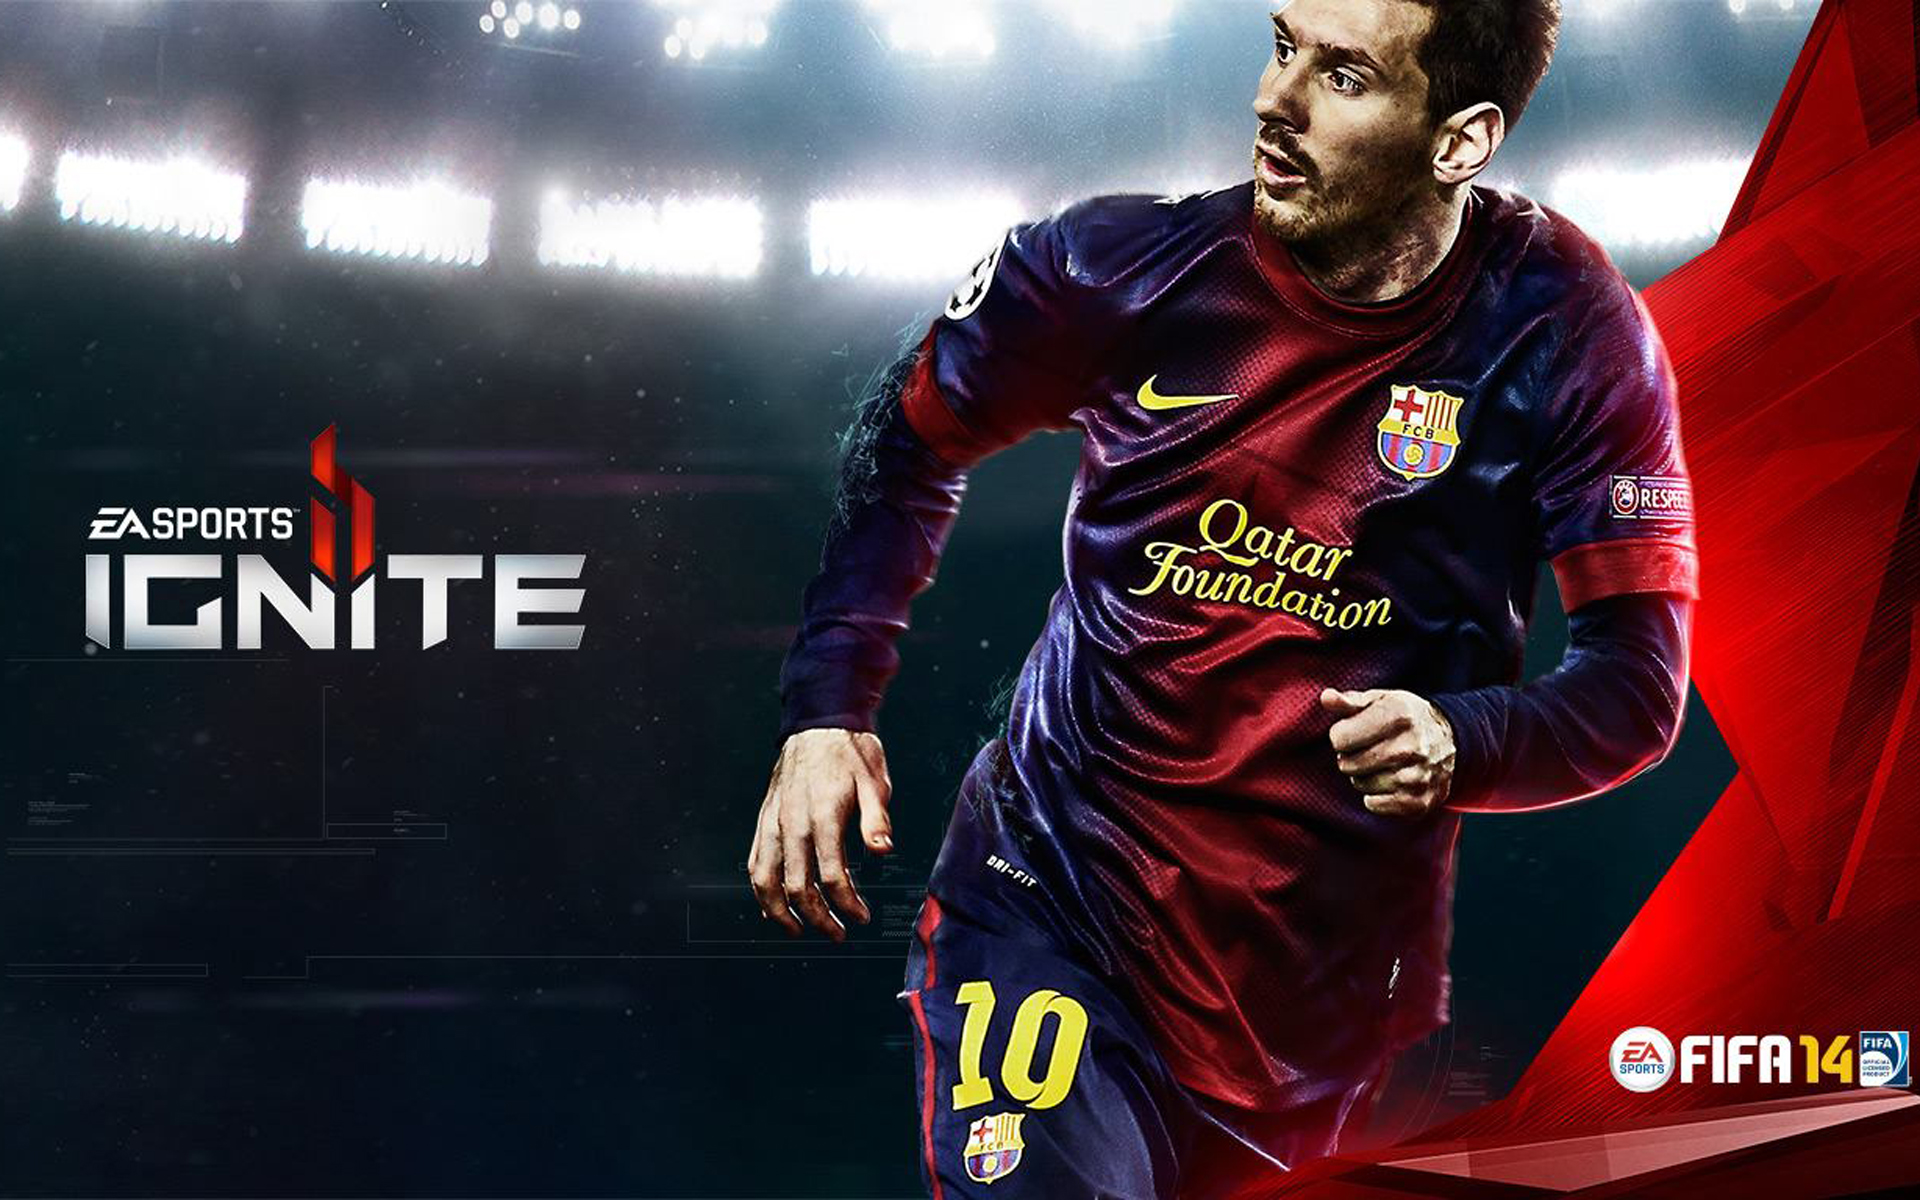 Lionel Messi On FIFA 14 EA Sports Ignite Picture Image HD Wallpapers